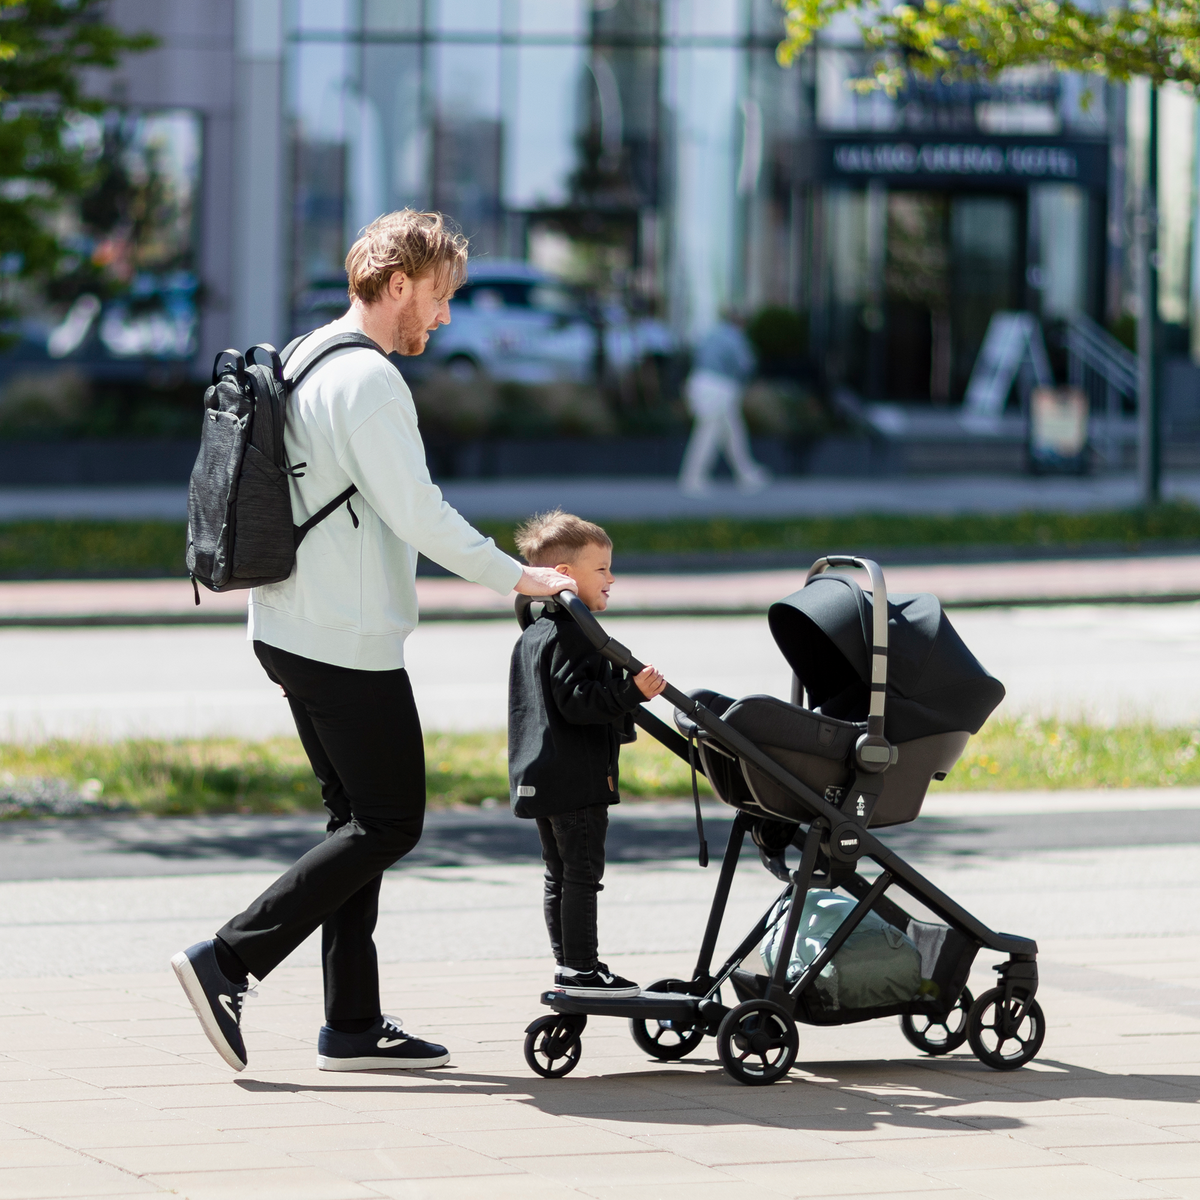 A parent walks with one kid on a rider board and the other in a car seat using the Thule Shine Car Seat Adapter.